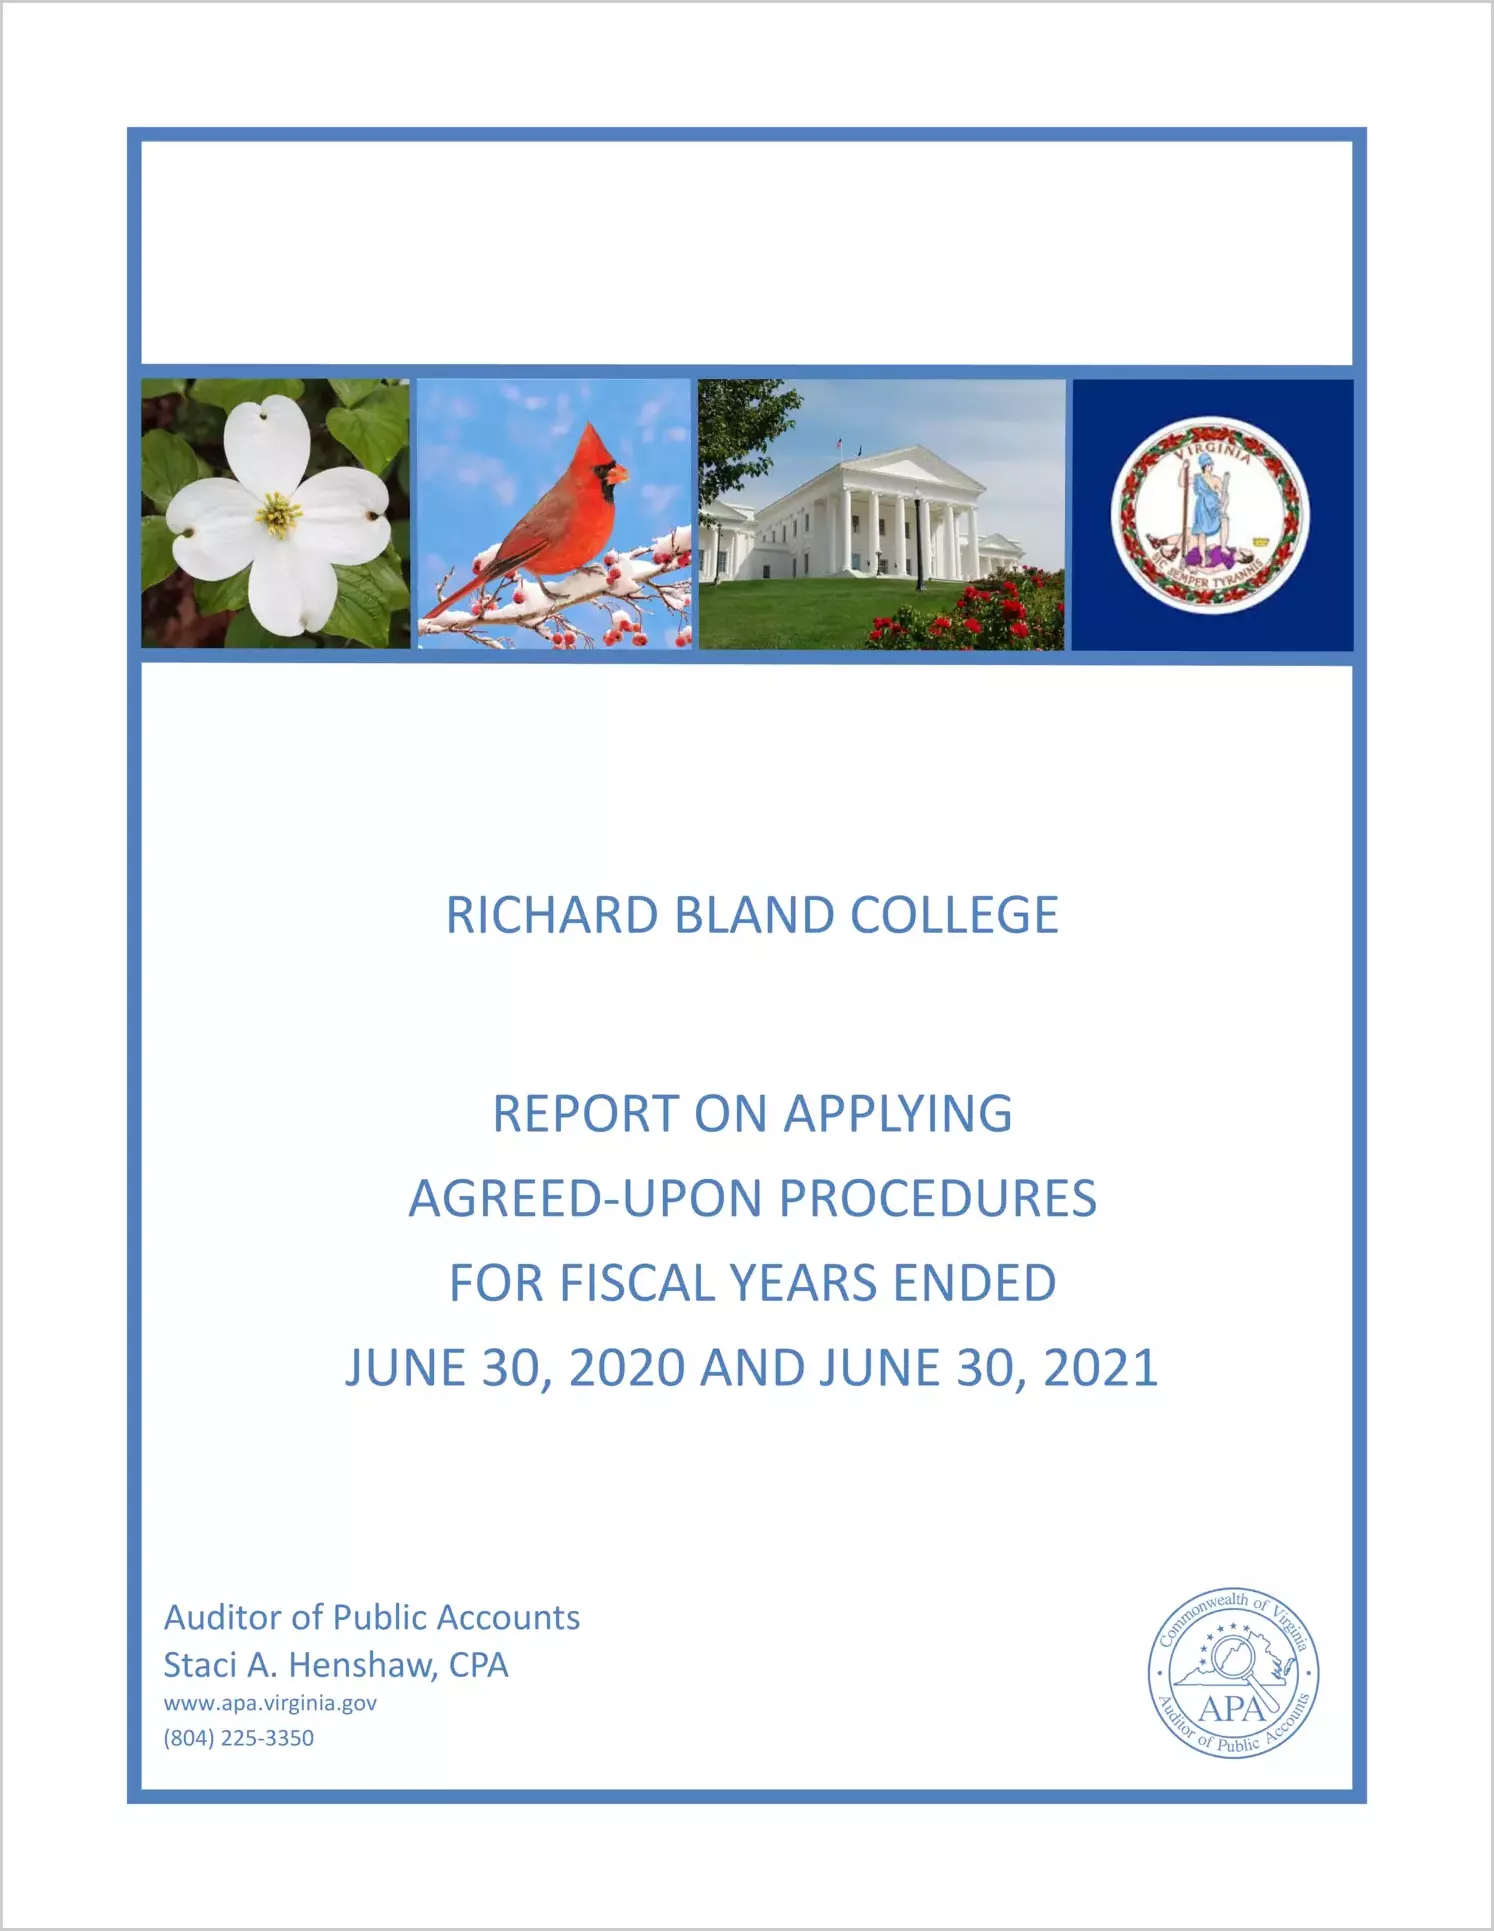 Richard Bland College Report on Applying Agreed-Upon Procedures for the fiscal years ended June 30, 2020 and June 30, 2021